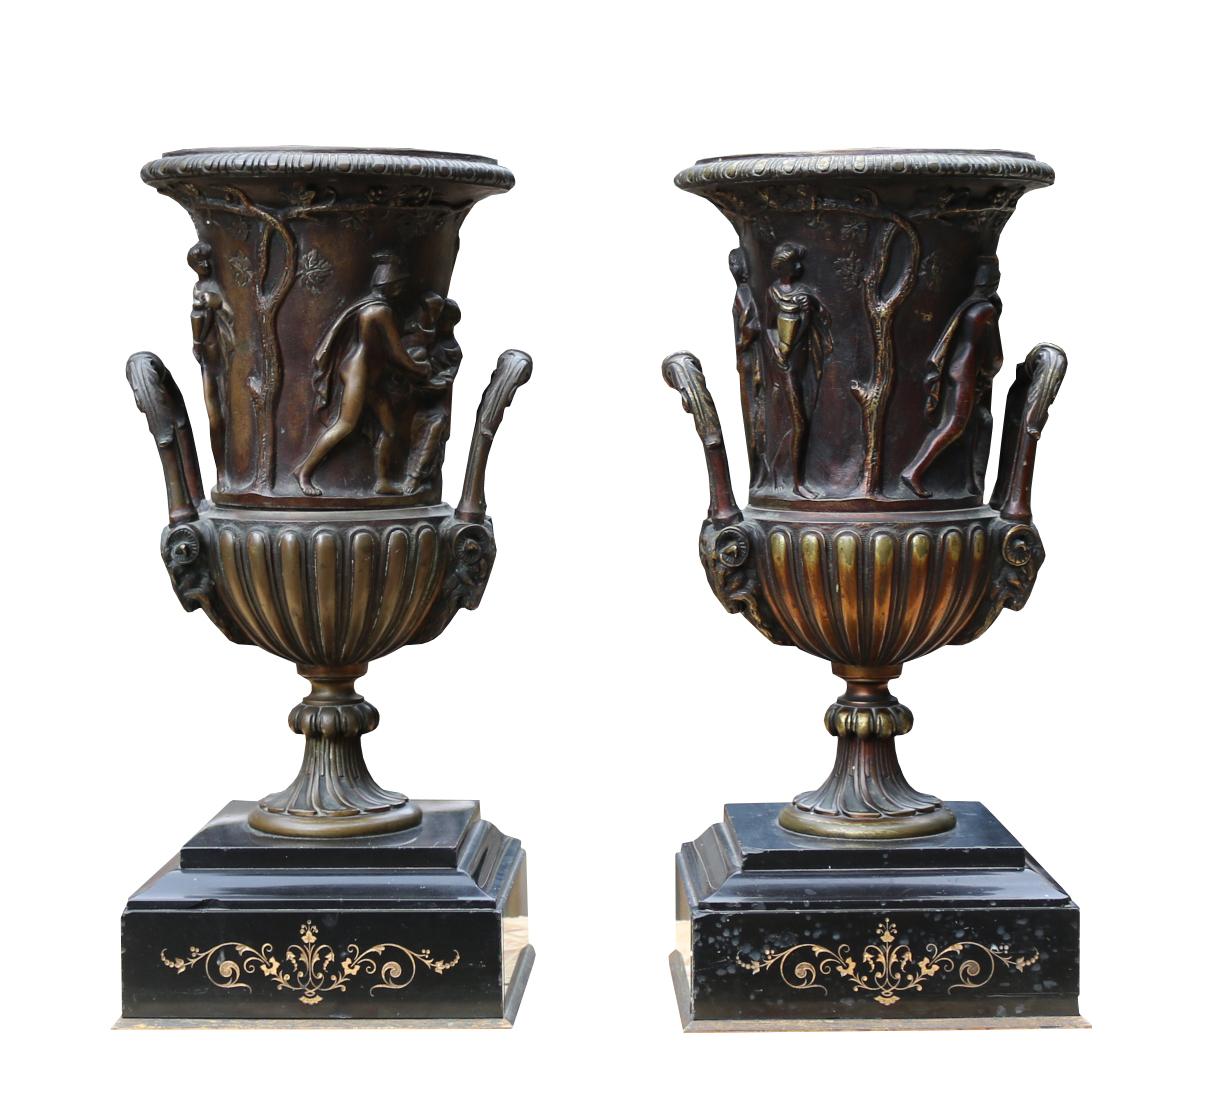 The Urns of campana form, each decorated with figures in classical attire with acanthus molded handles sat on black marble bases with scroll decoration to the front.